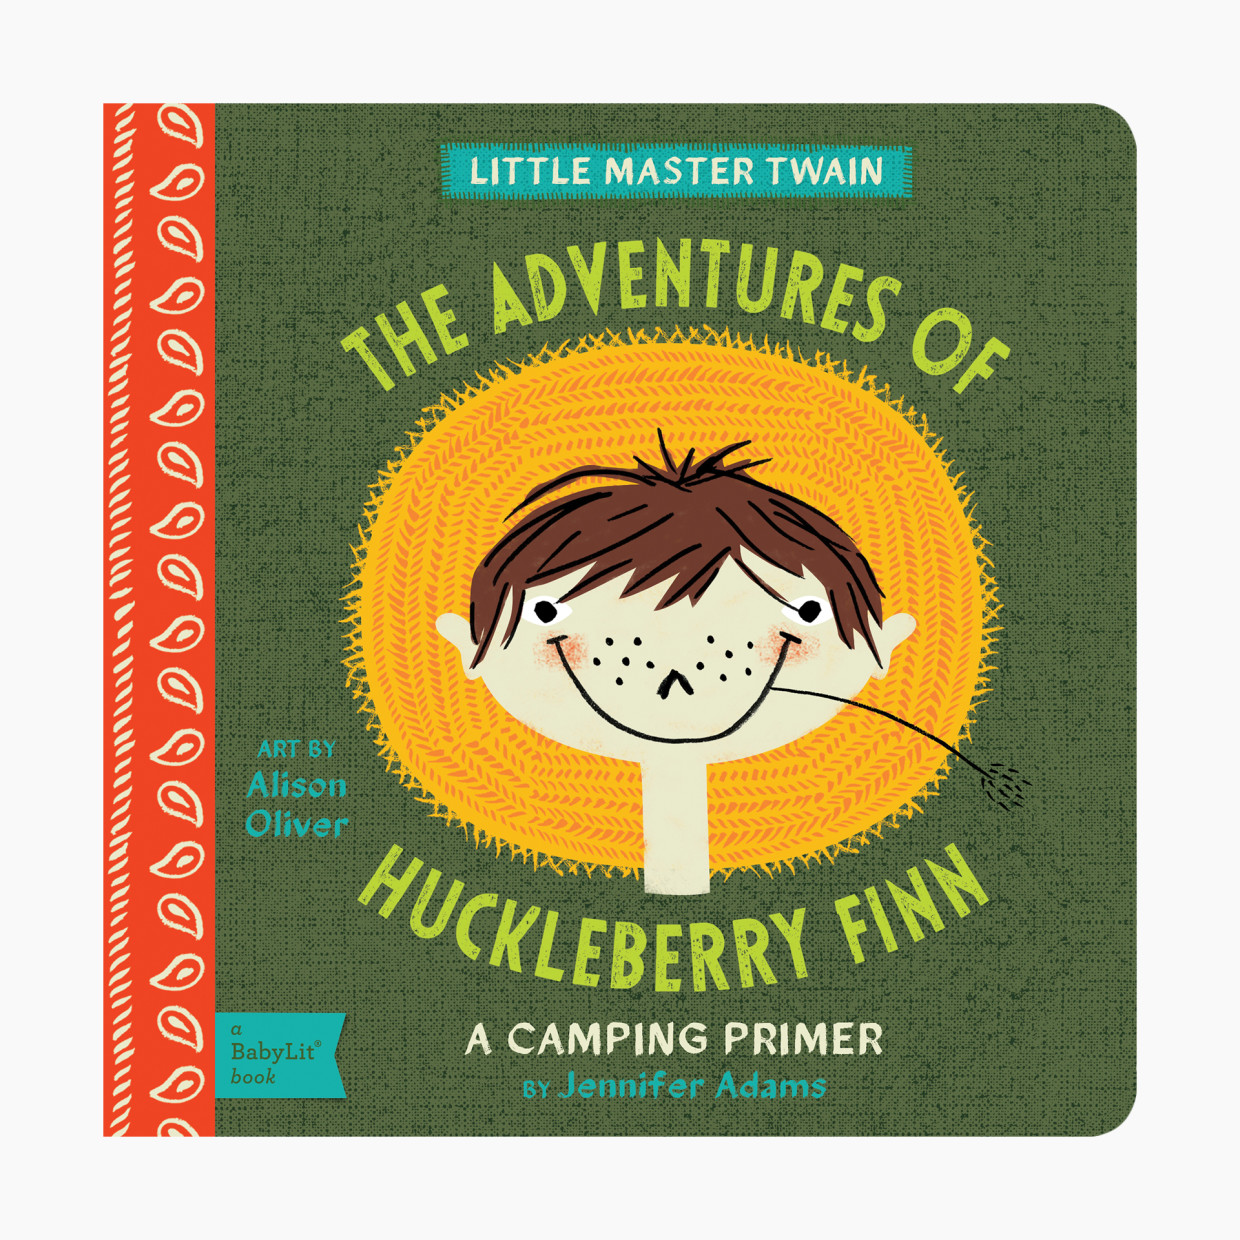 The Adventures of Huckleberry Finn: A BabyLit Camping Primer.